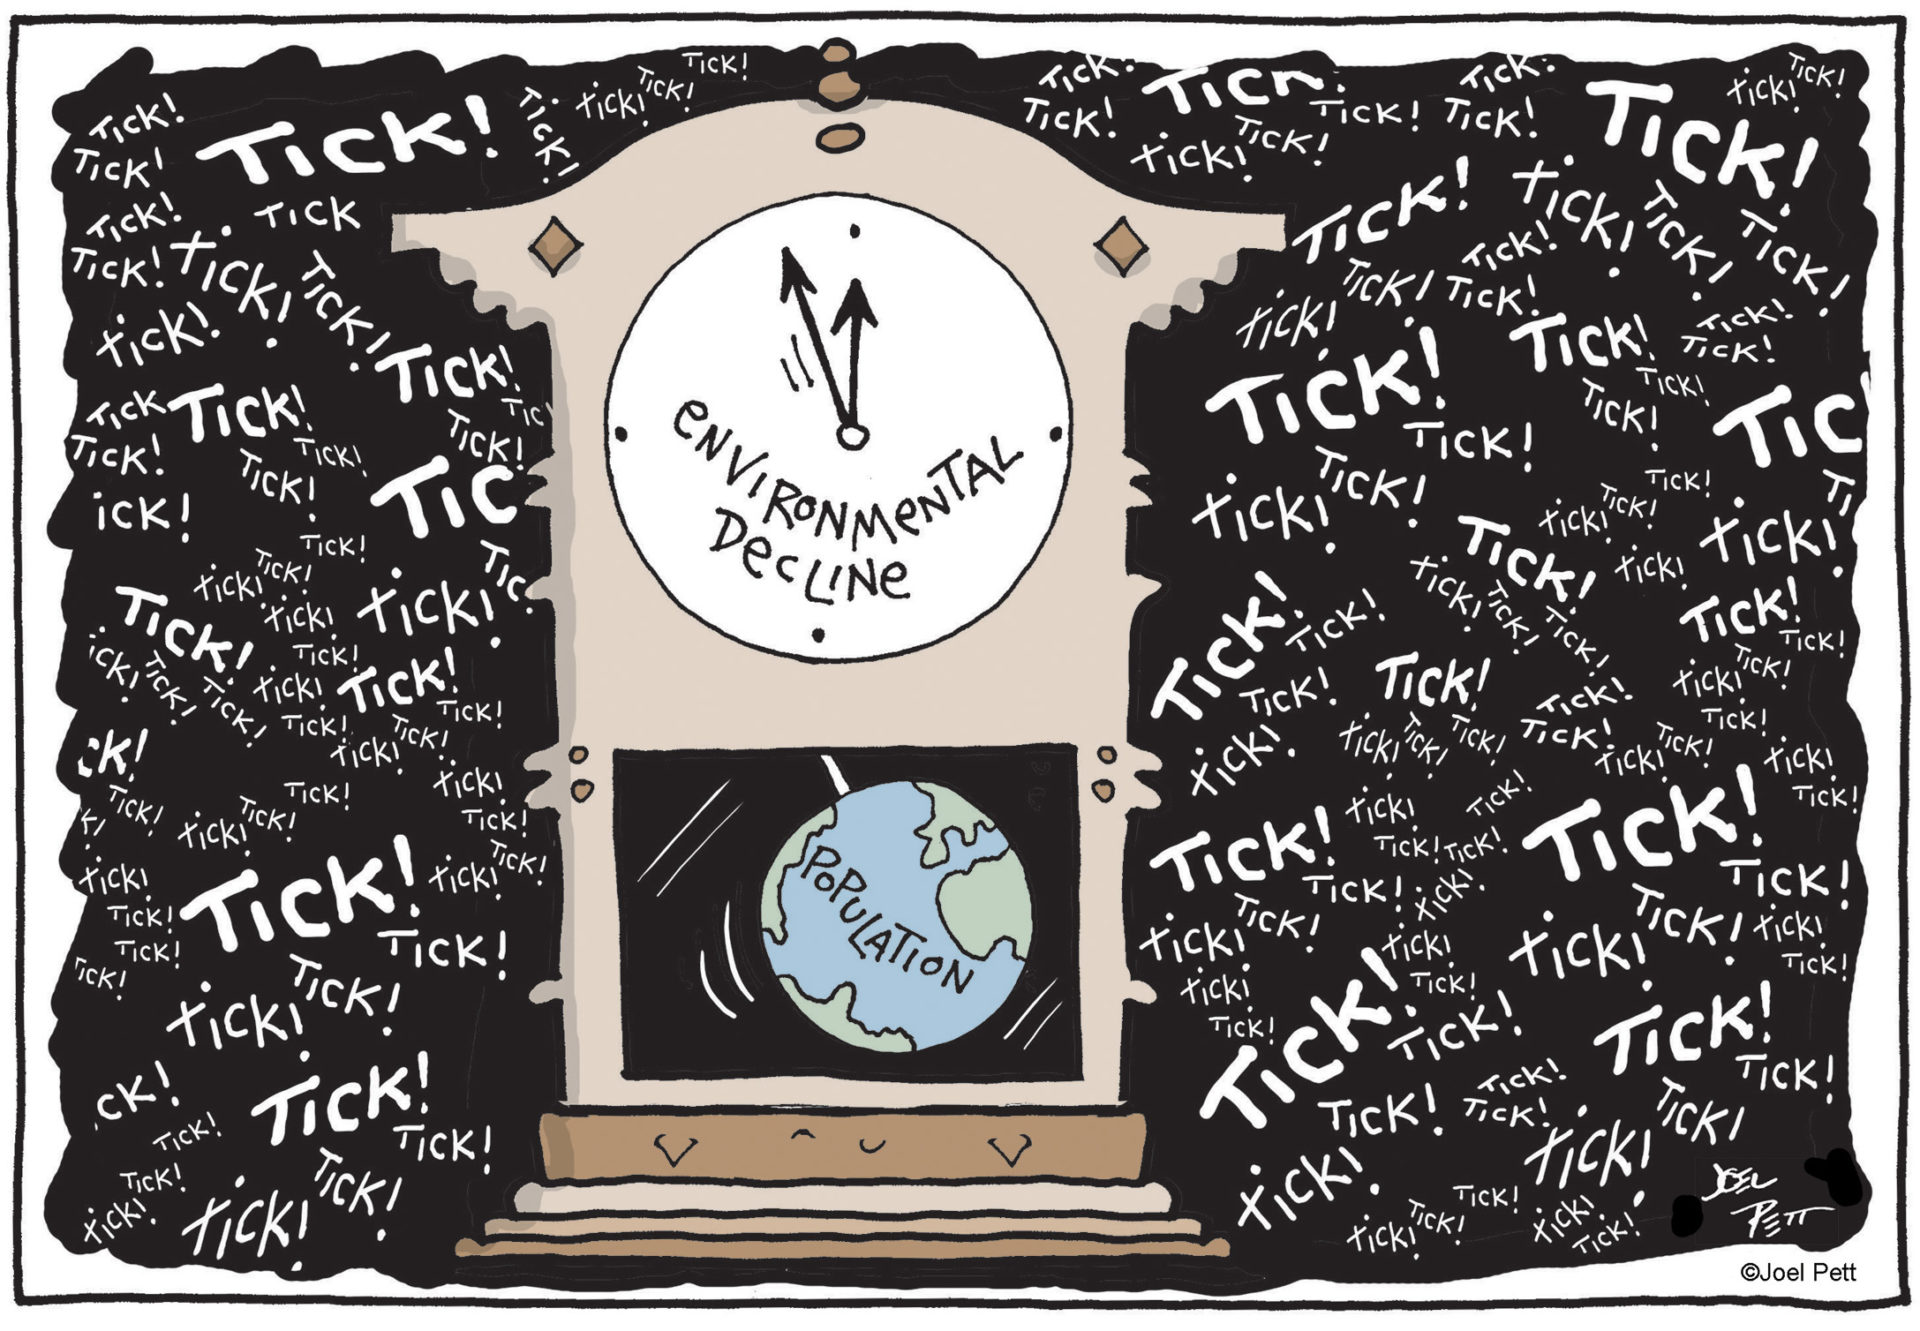 a political cartoon depicting an old pendulum clock. The pendulum is the earth with 